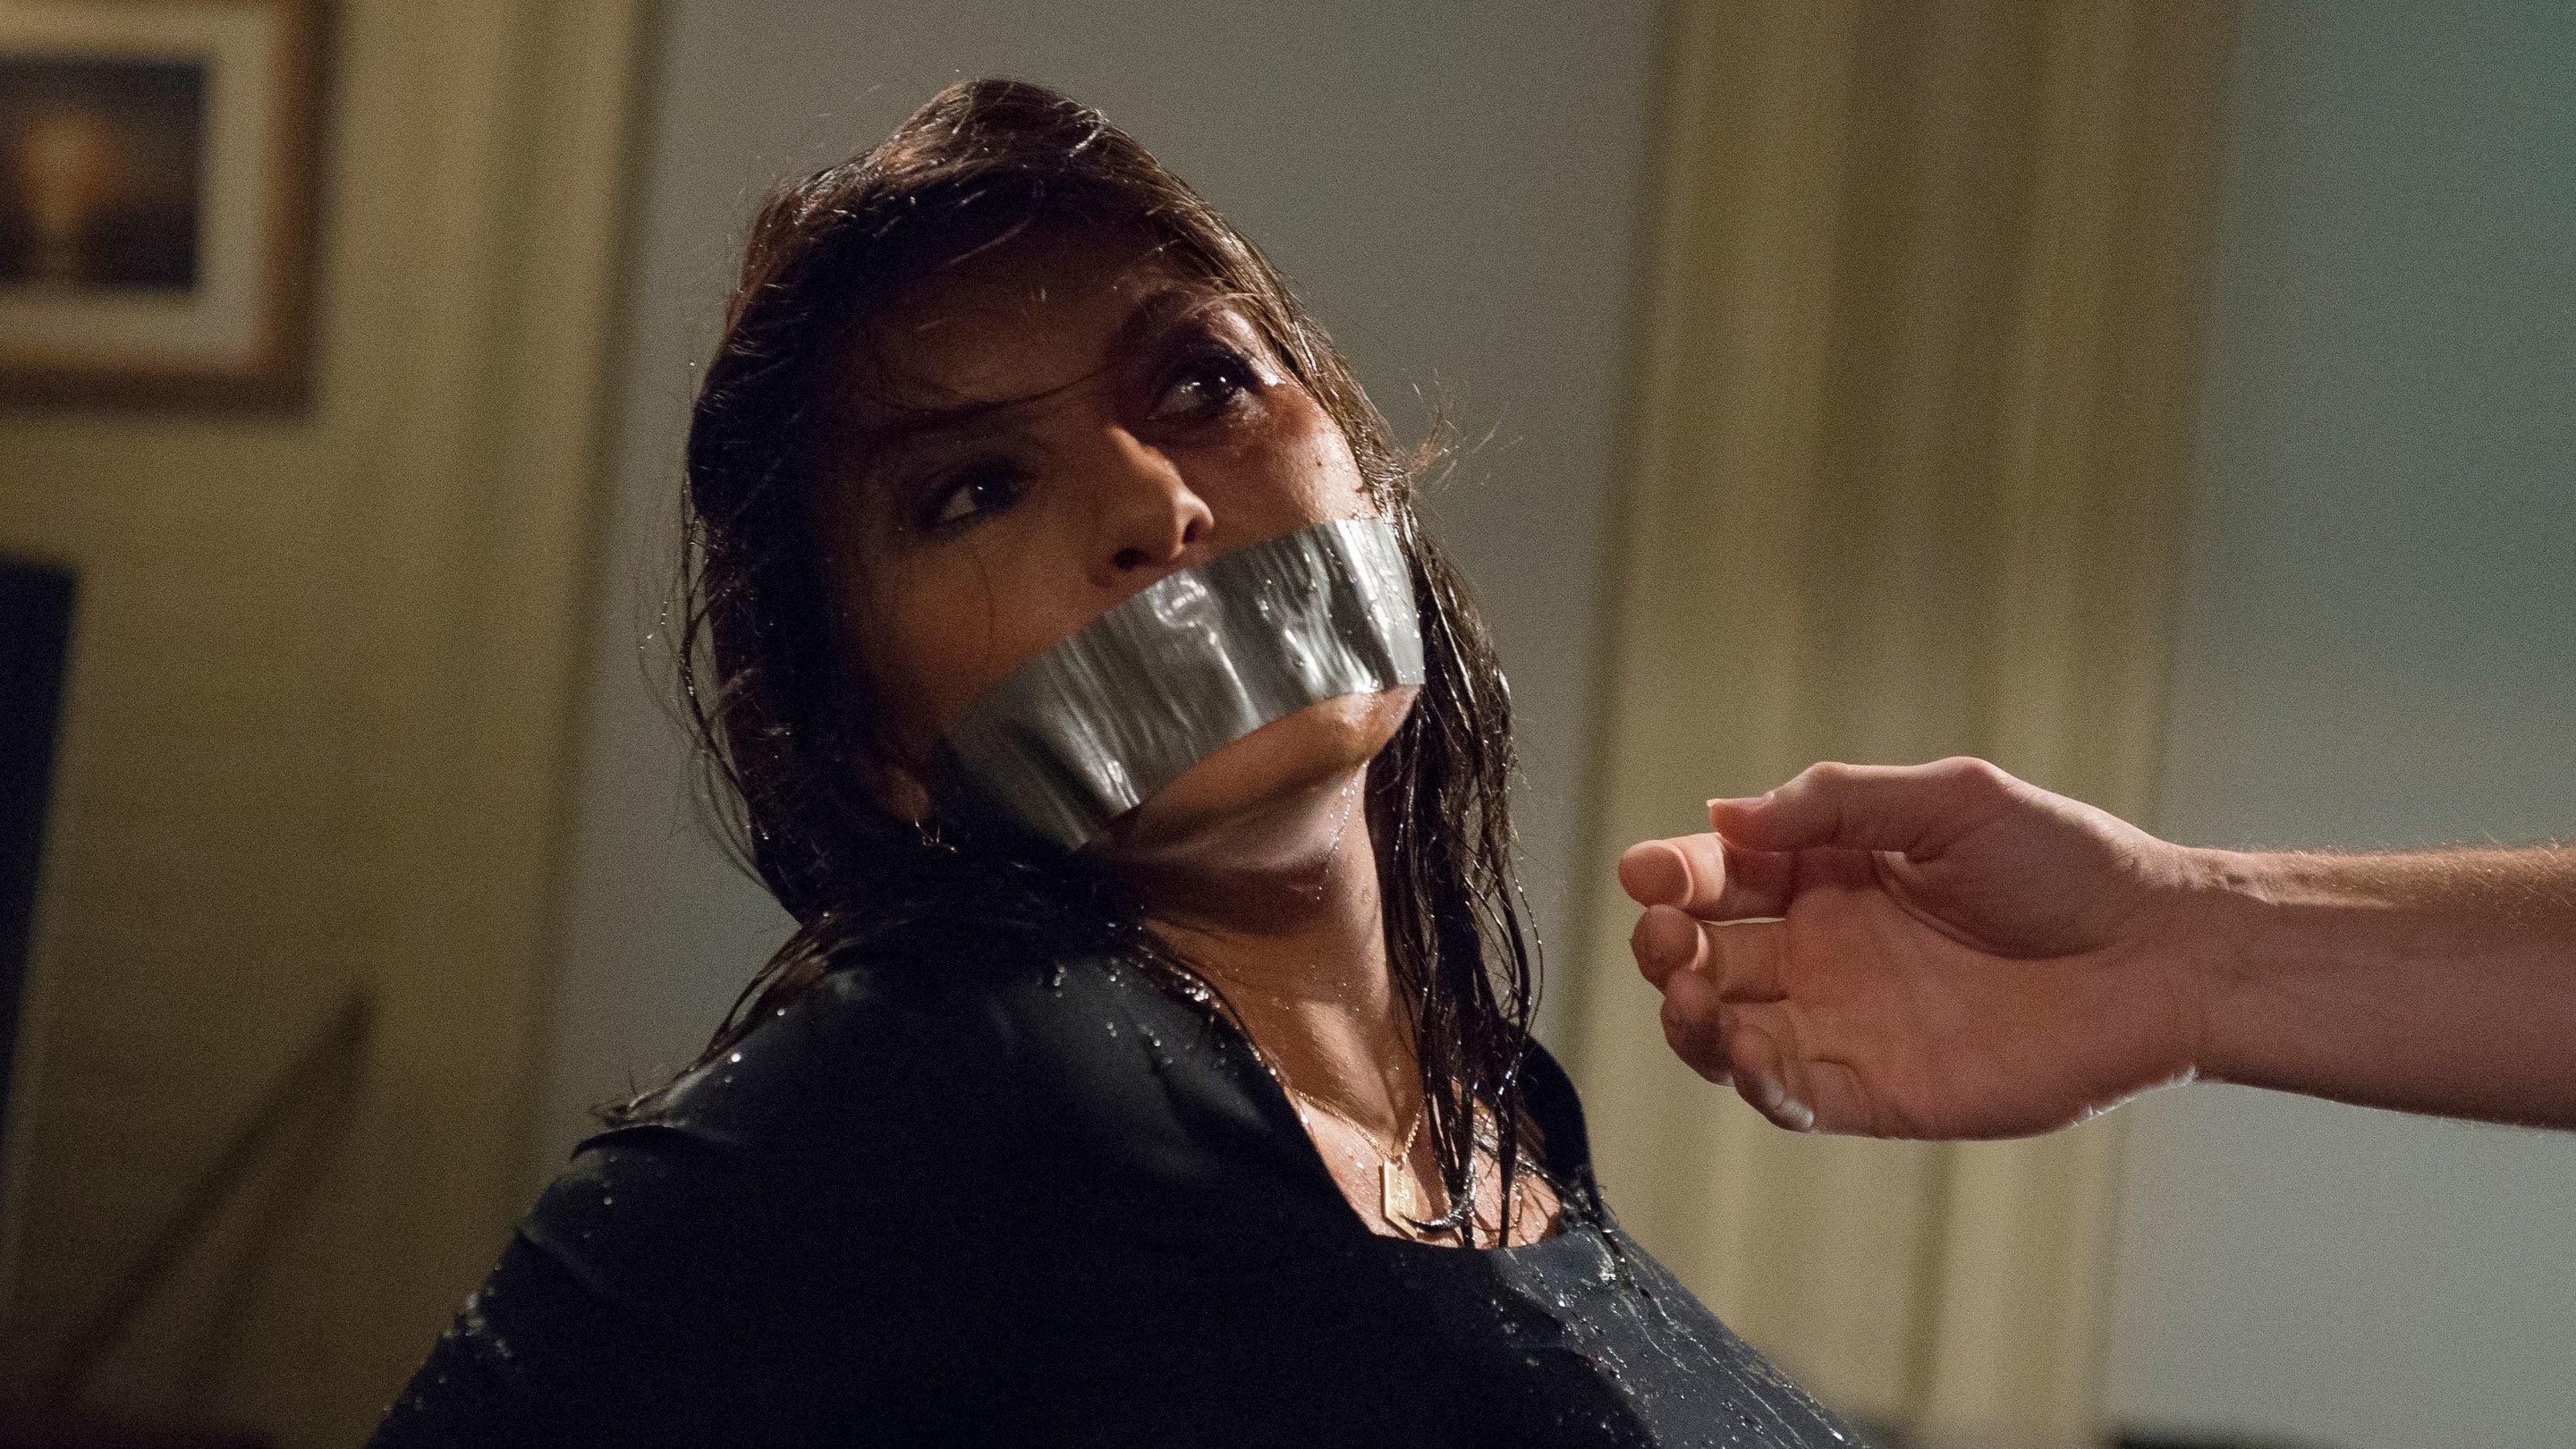 A distressed woman with duct tape over her mouth and wet hair, as a fist is raised near her face